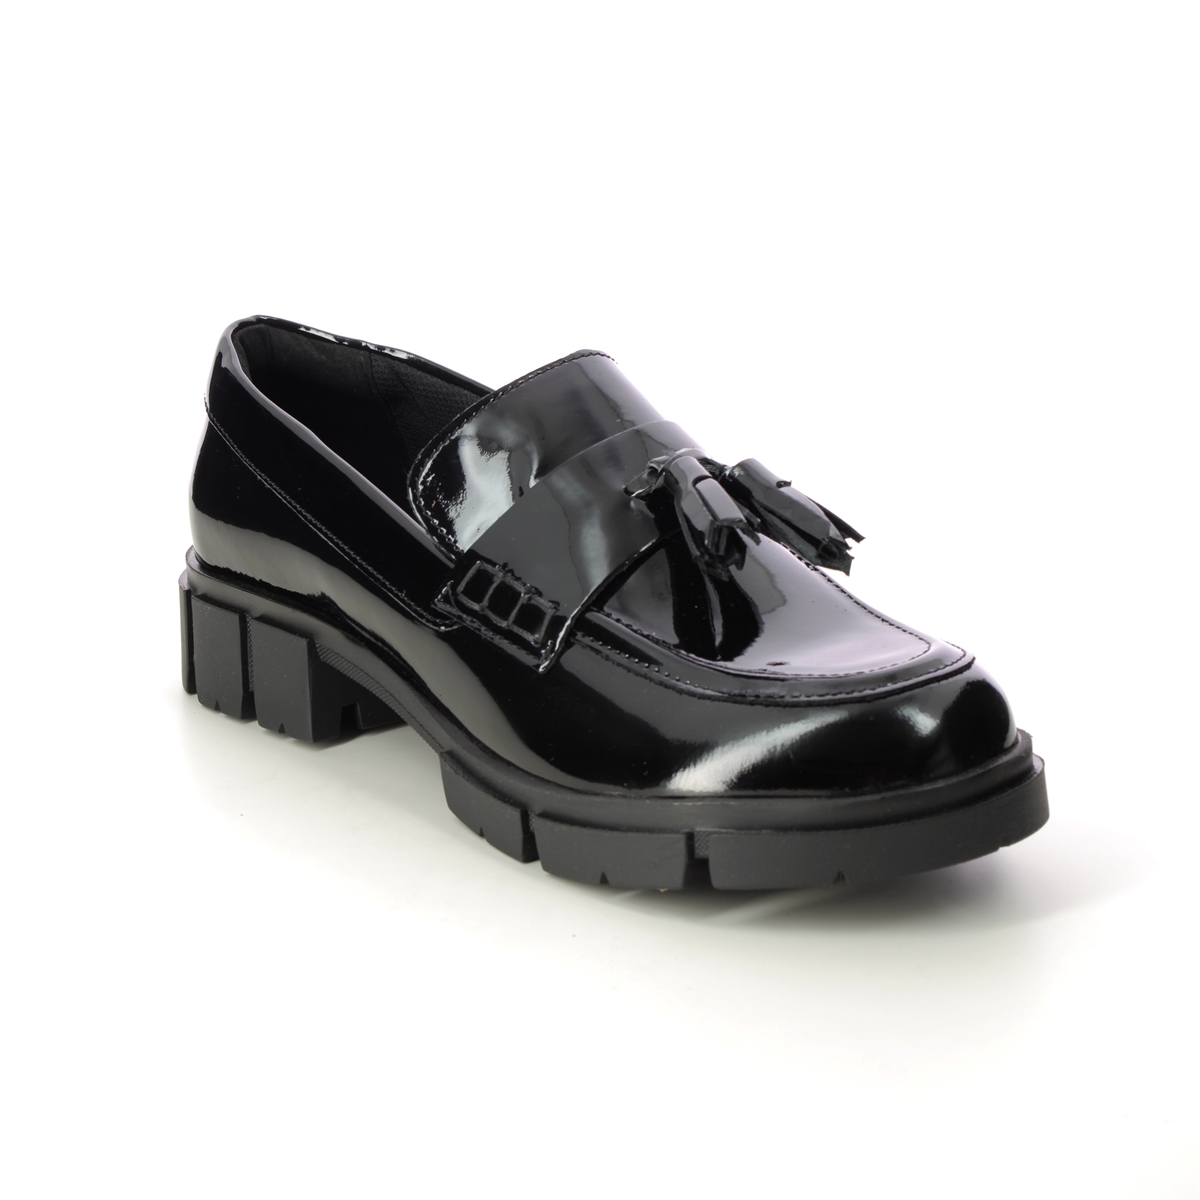 Clarks Teala Loafer Black Patent Womens Loafers 689984D In Size 6 In Plain Black Patent